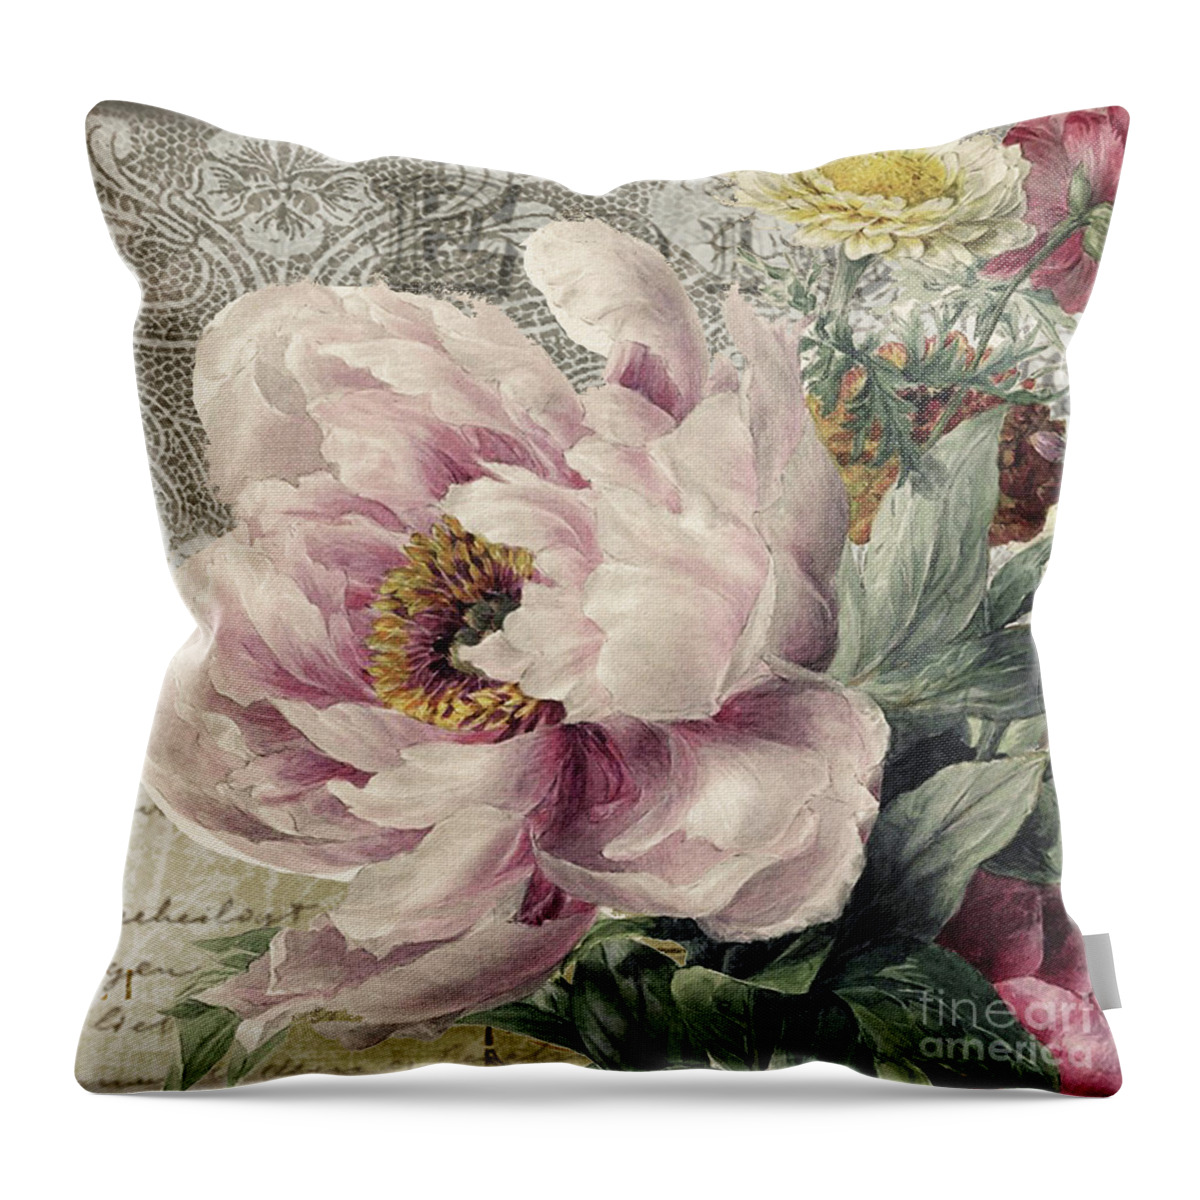 Peony Throw Pillow featuring the painting Paris Peony by Mindy Sommers